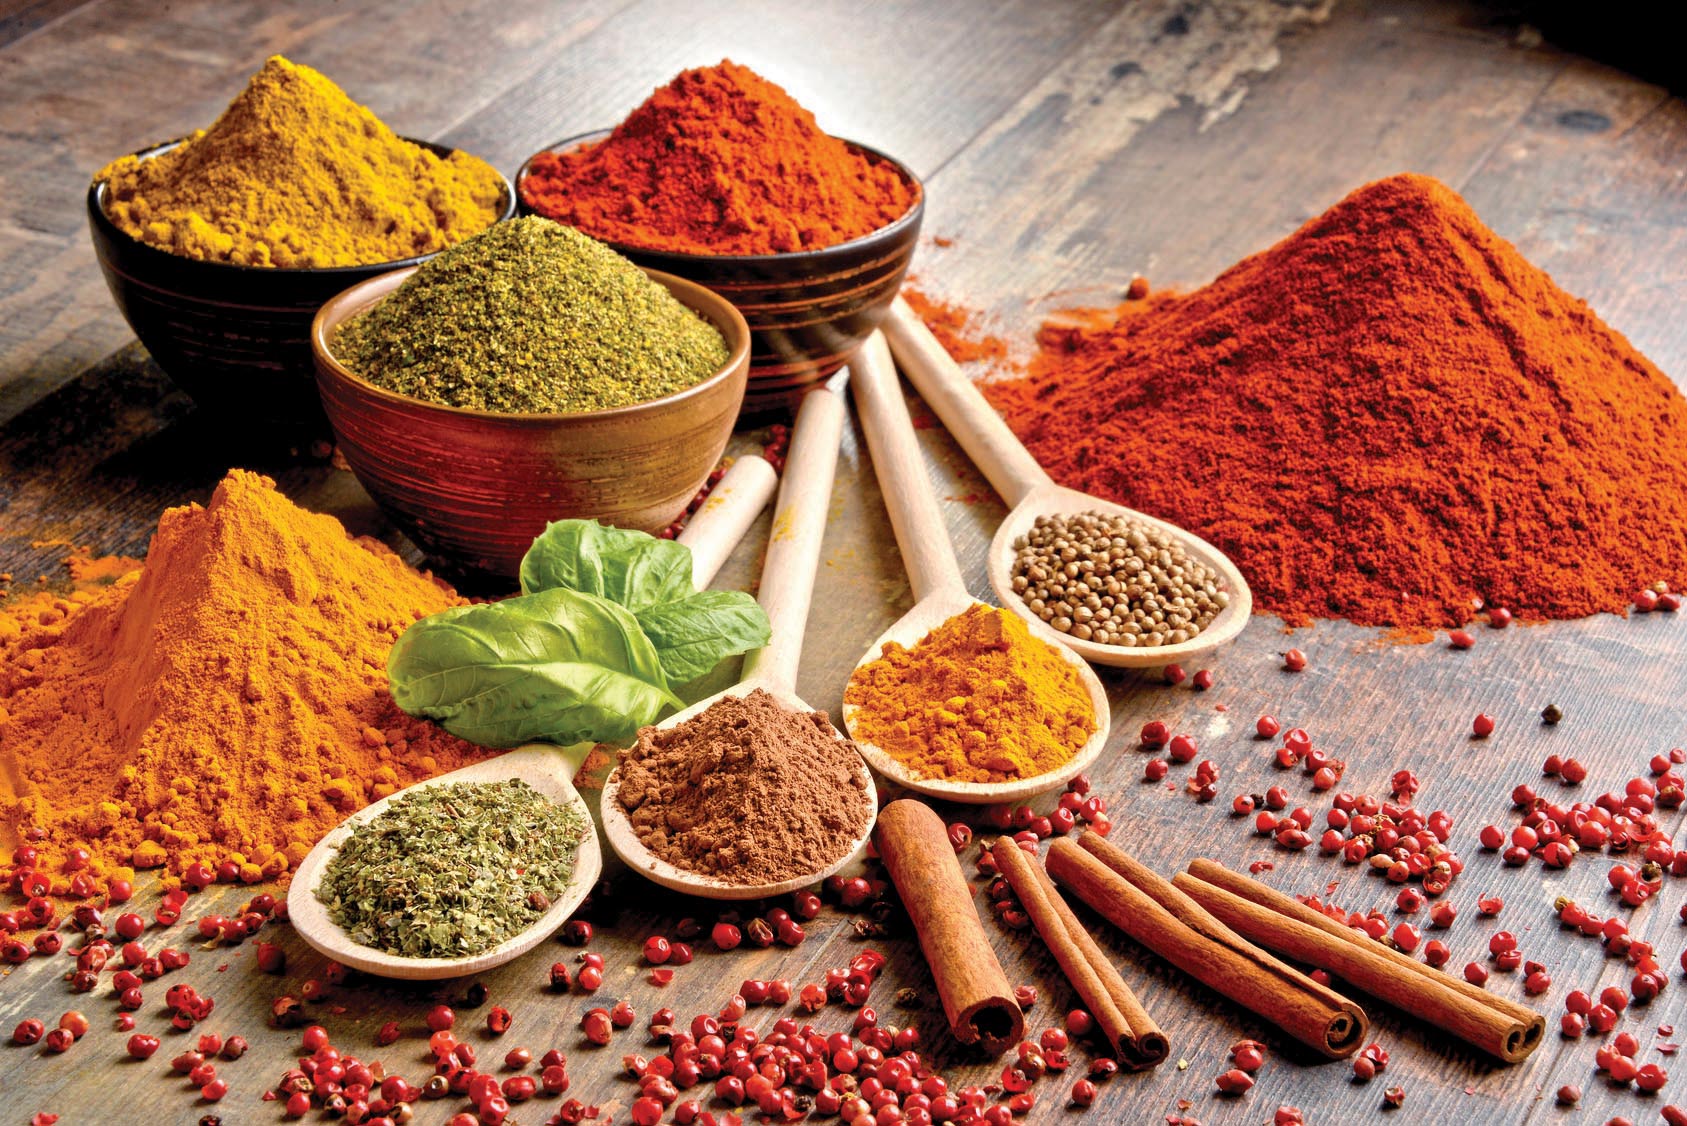 India's spice exports rise 12% to record all-time high in value and volume  in 2016-17 » Kamal Sandesh